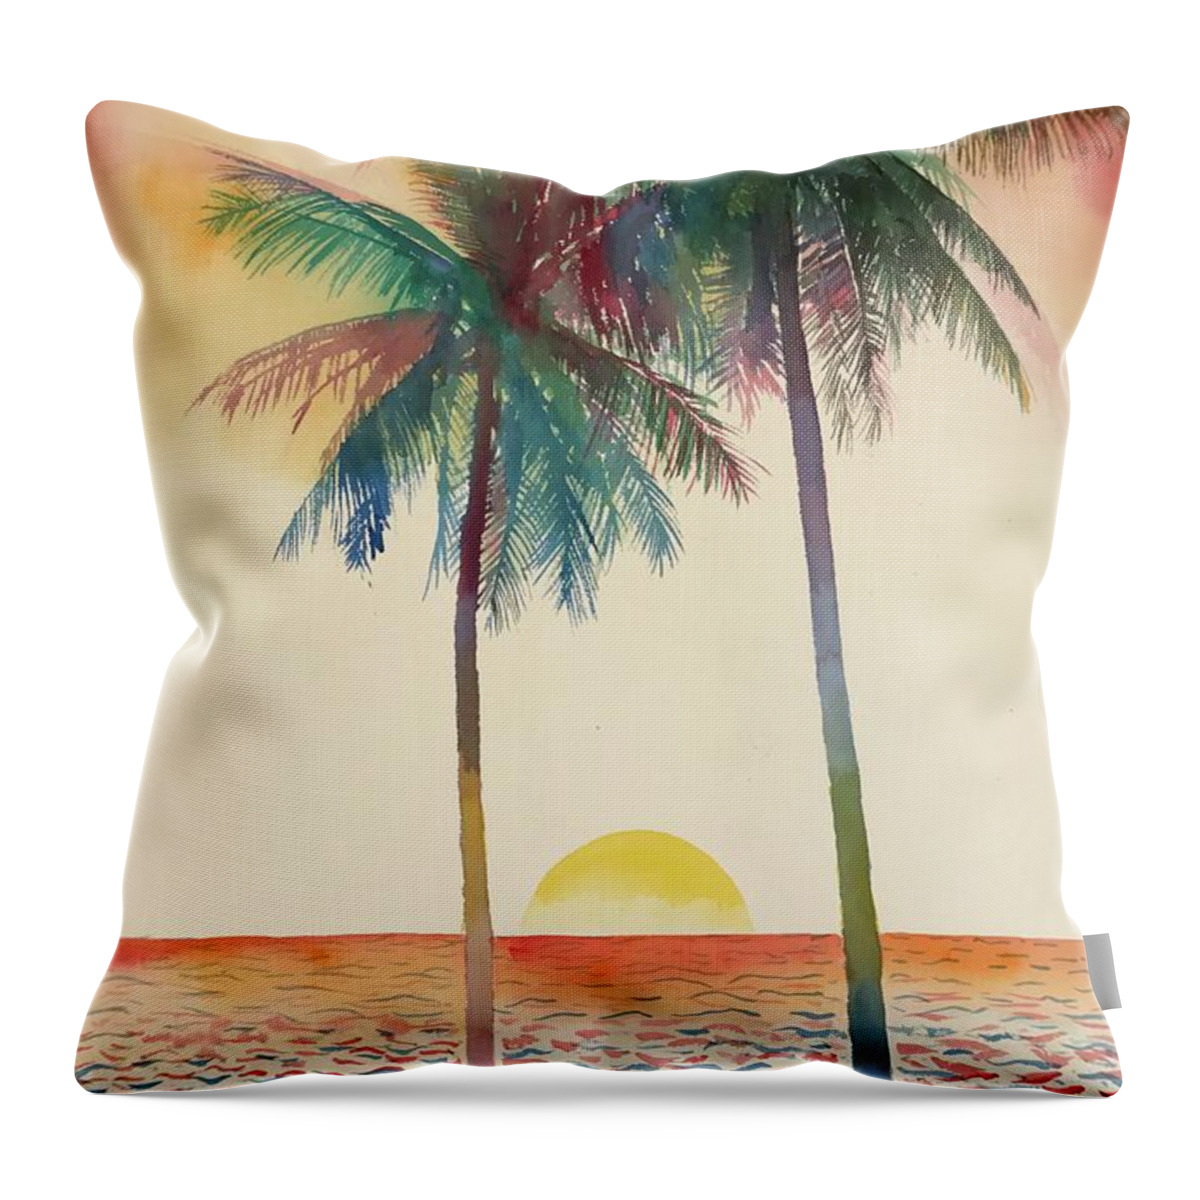 #palmtrees #palm #trees #ocean #sunset #mexico #beach #glenneff #thesoundpoetsmusic #picturerockstudio #watercolor #watercolorpainting #beachchairs #tranquil Throw Pillow featuring the painting Palm Trees Beach Sunset by Glen Neff